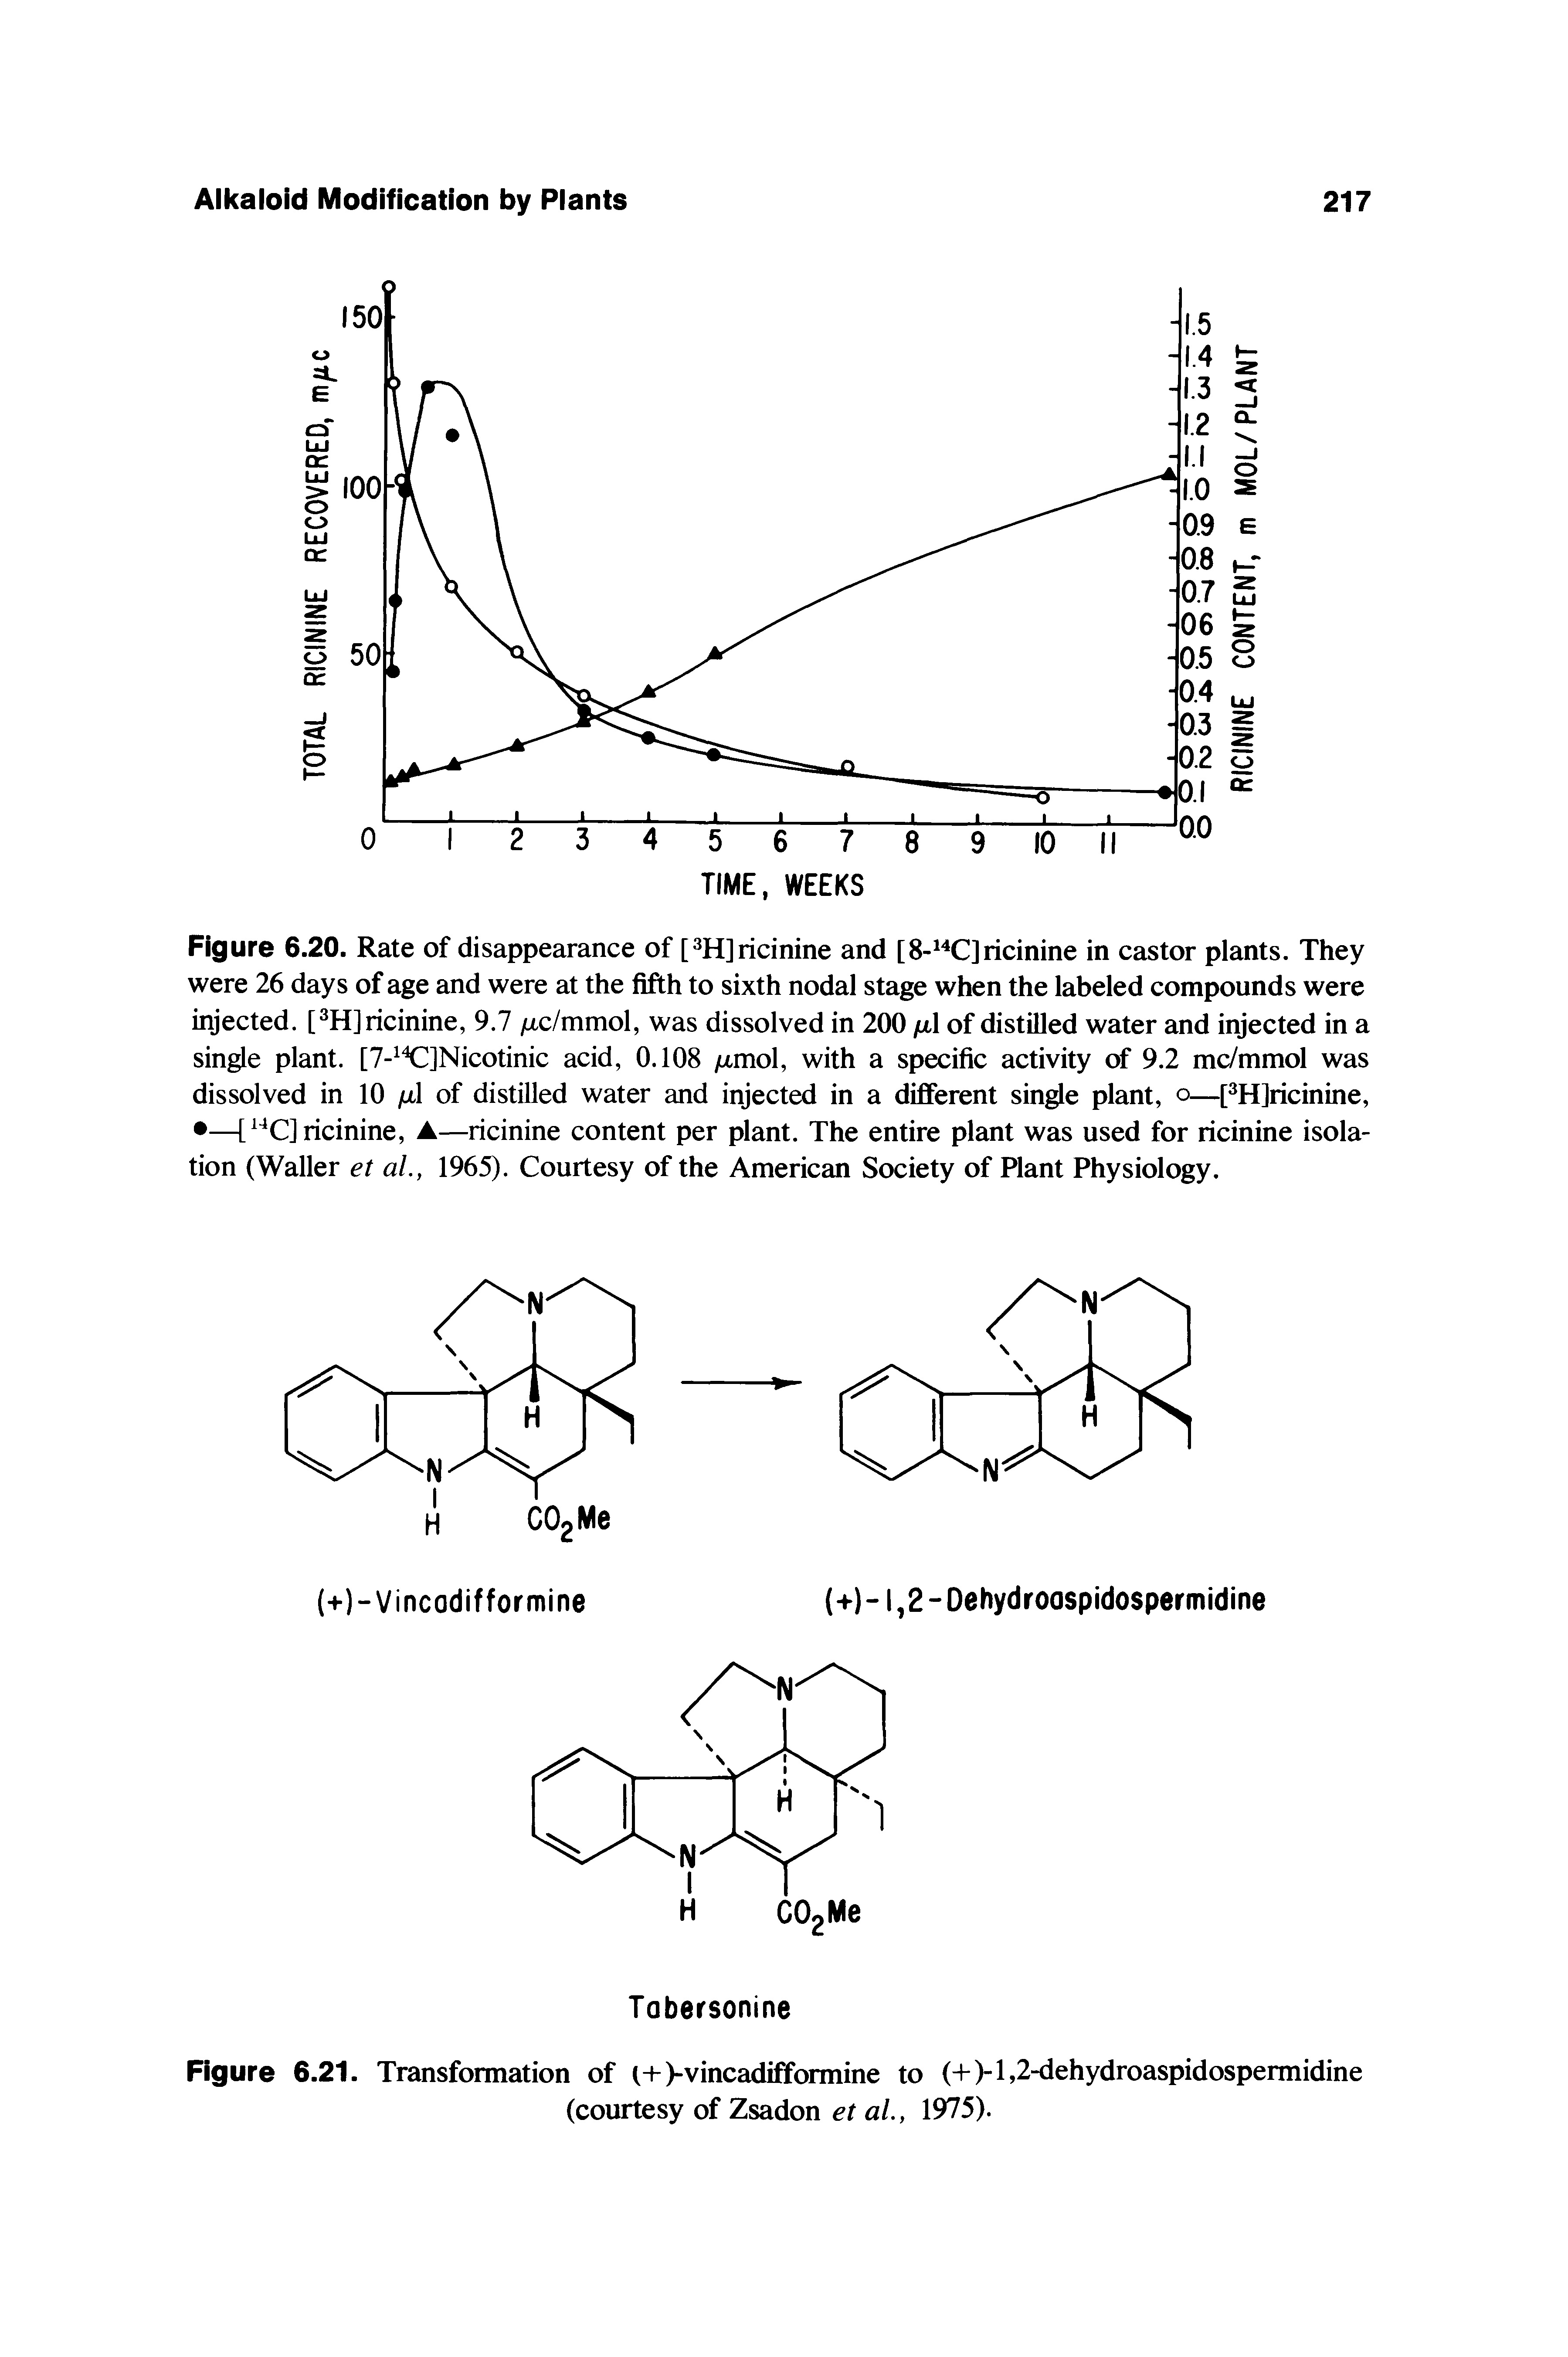 Figure 6.20. Rate of disappearance of [ HJricinine and [8- C]ricinine in castor plants. They were 26 days of age and were at the fifth to sixth nodal stage when the labeled compounds were injected. [ Hjricinine, 9.7 /Ltc/mmol, was dissolved in 200 ix of distilled water and injected in a single plant. [7- K ]Nicotinic acid, 0.108 jumol, with a specific activity of 9.2 mc/mmol was dissolved in 10 of distilled water and injected in a different single plant, o—pHJricinine, —[ Cjricinine, A—ricinine content per plant. The entire plant was used for ricinine isolation (Waller et ai, 1965). Courtesy of the American Society of Plant Physiology.